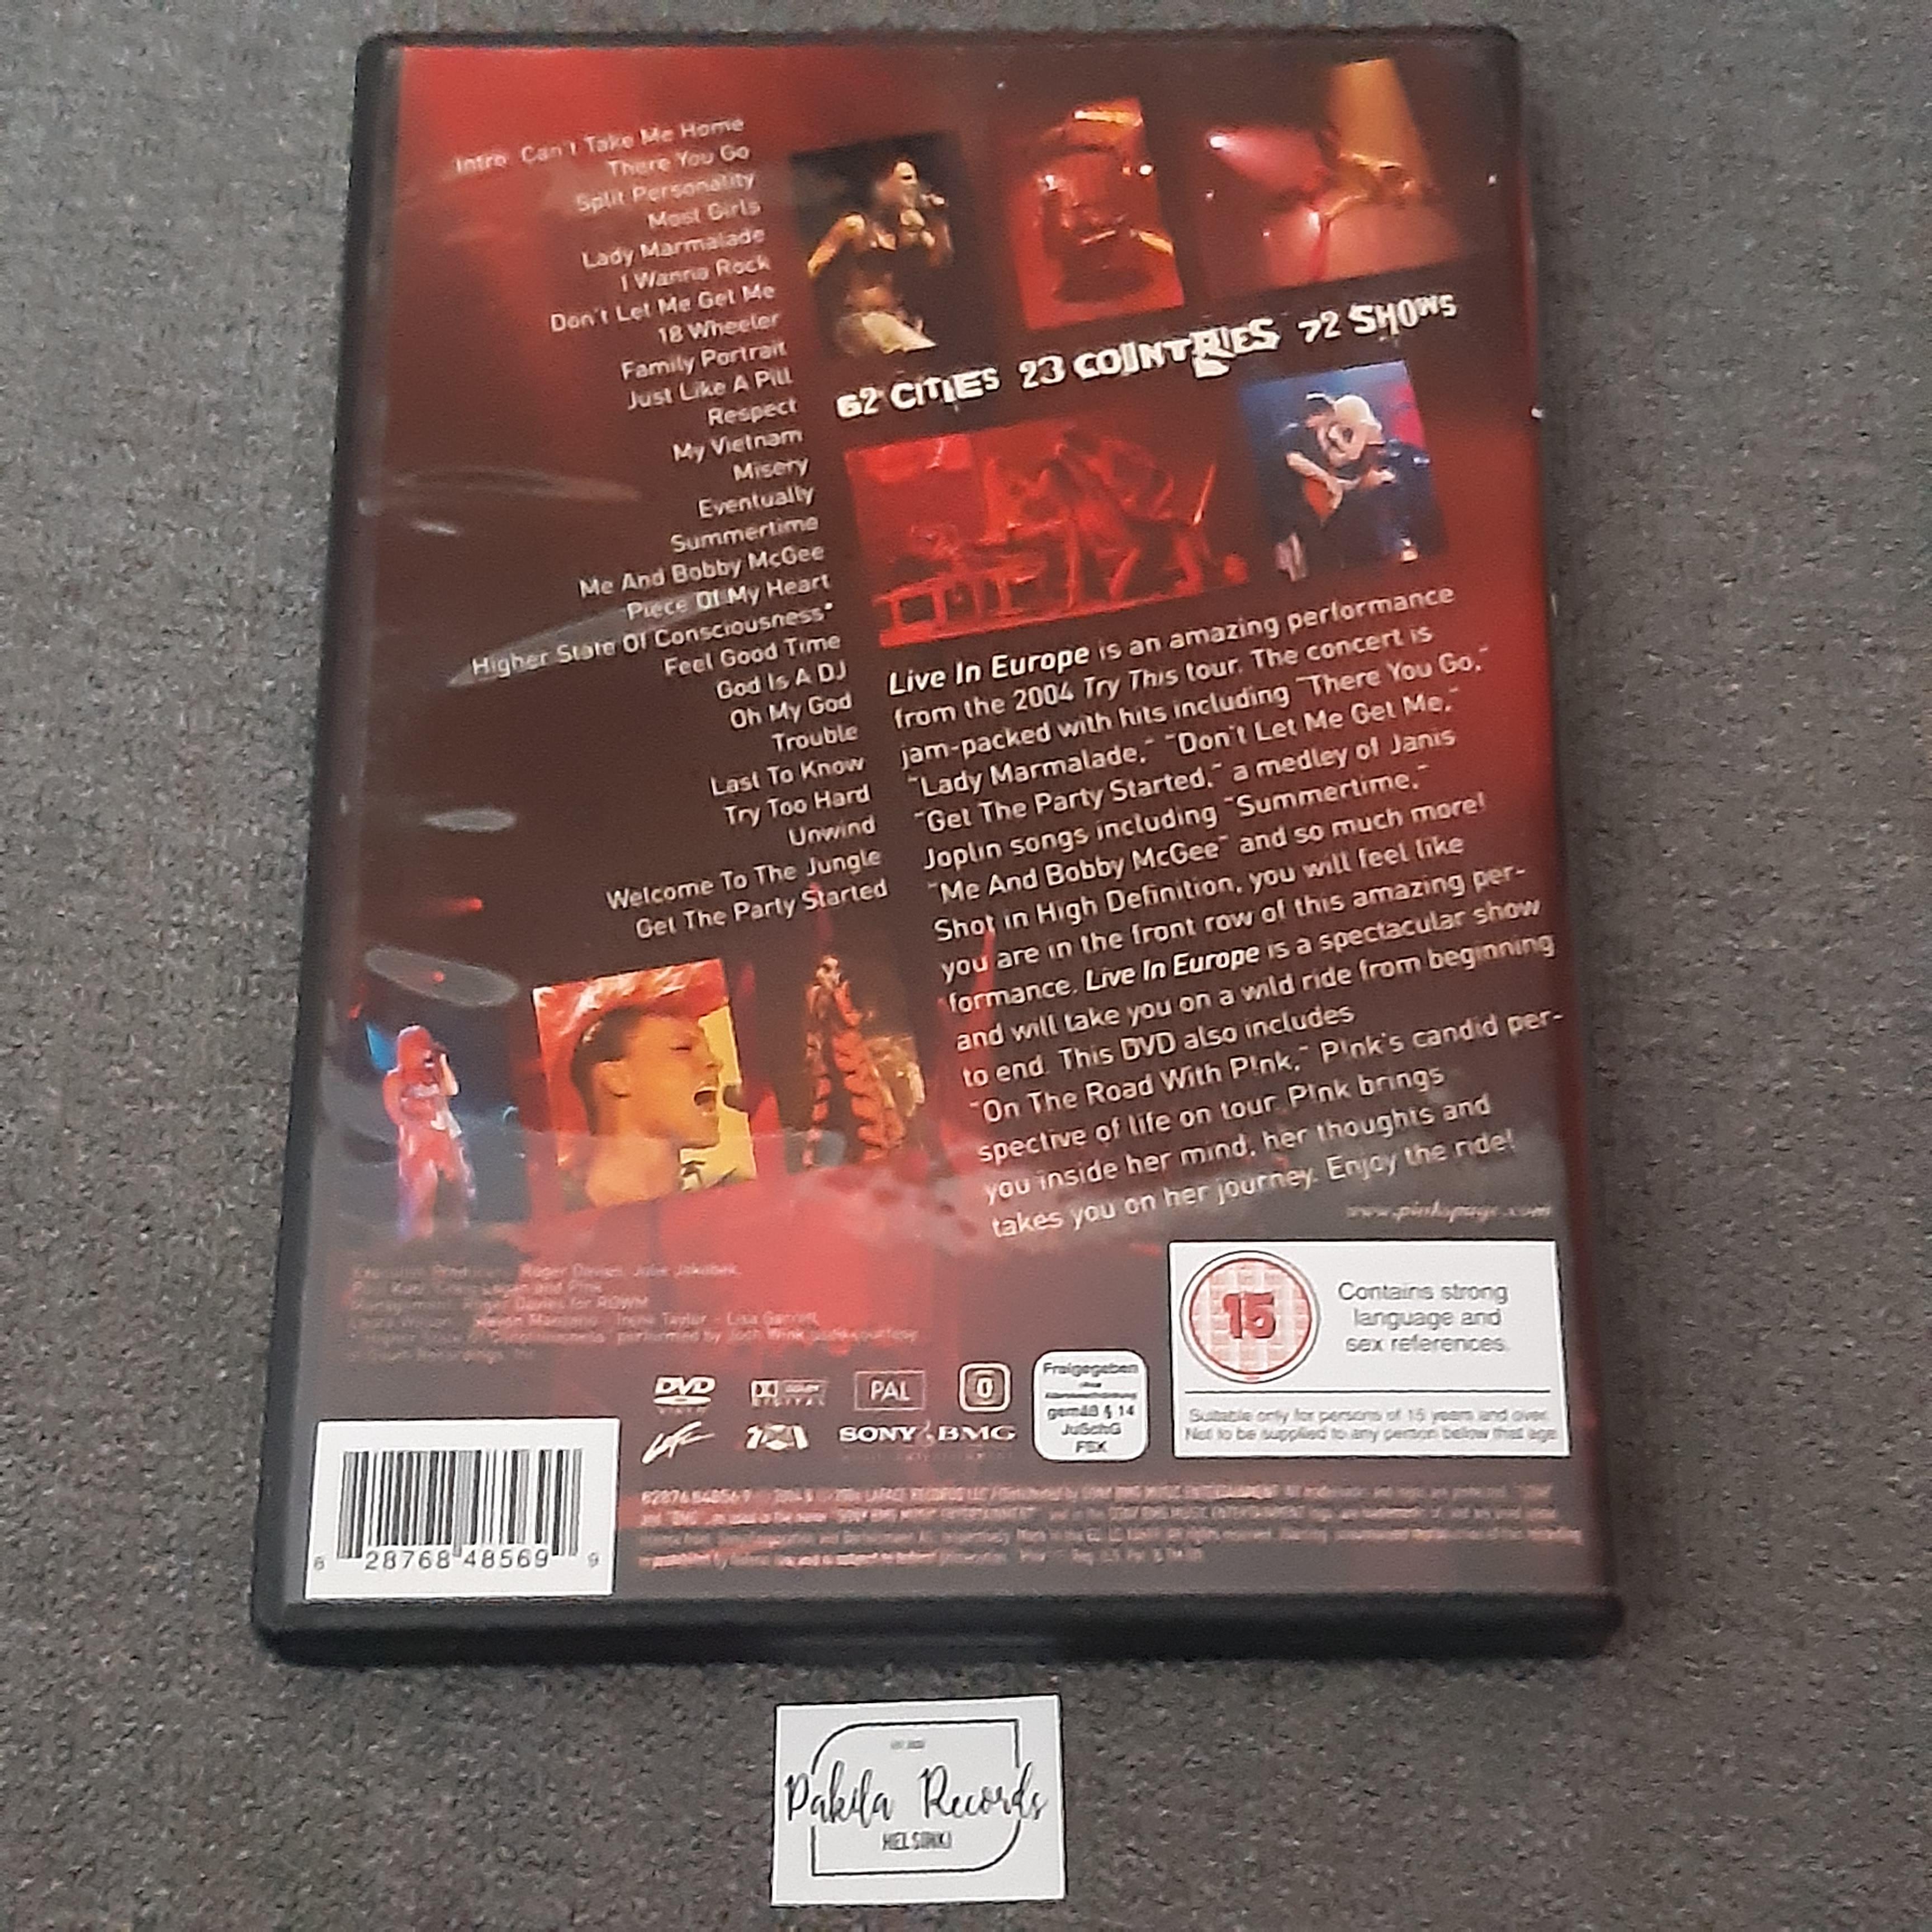 Pink - Live In Europe - DVD (käytetty)